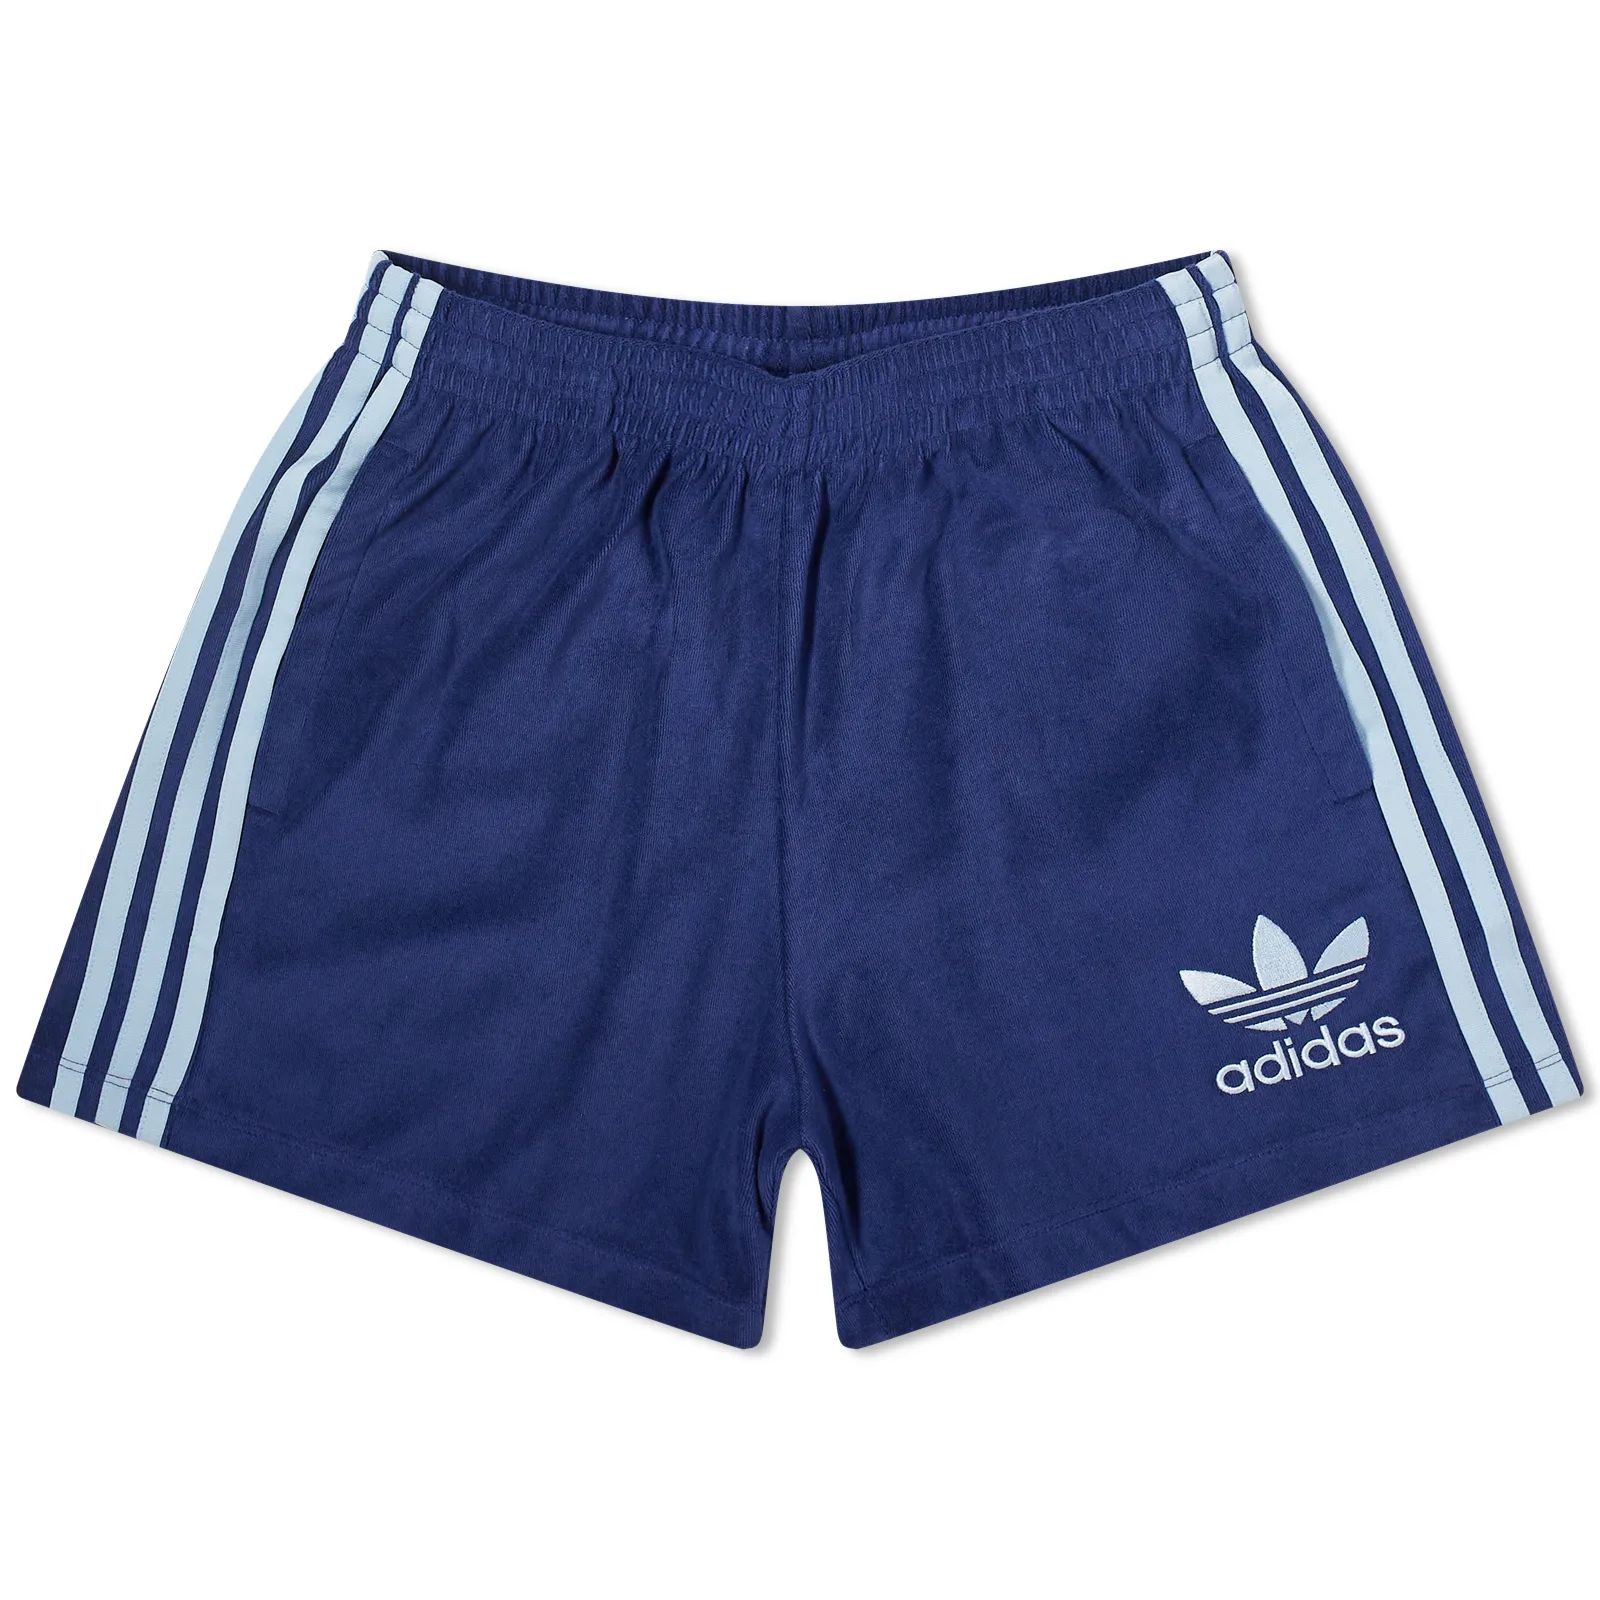 Adidas Terry Short | END. Clothing